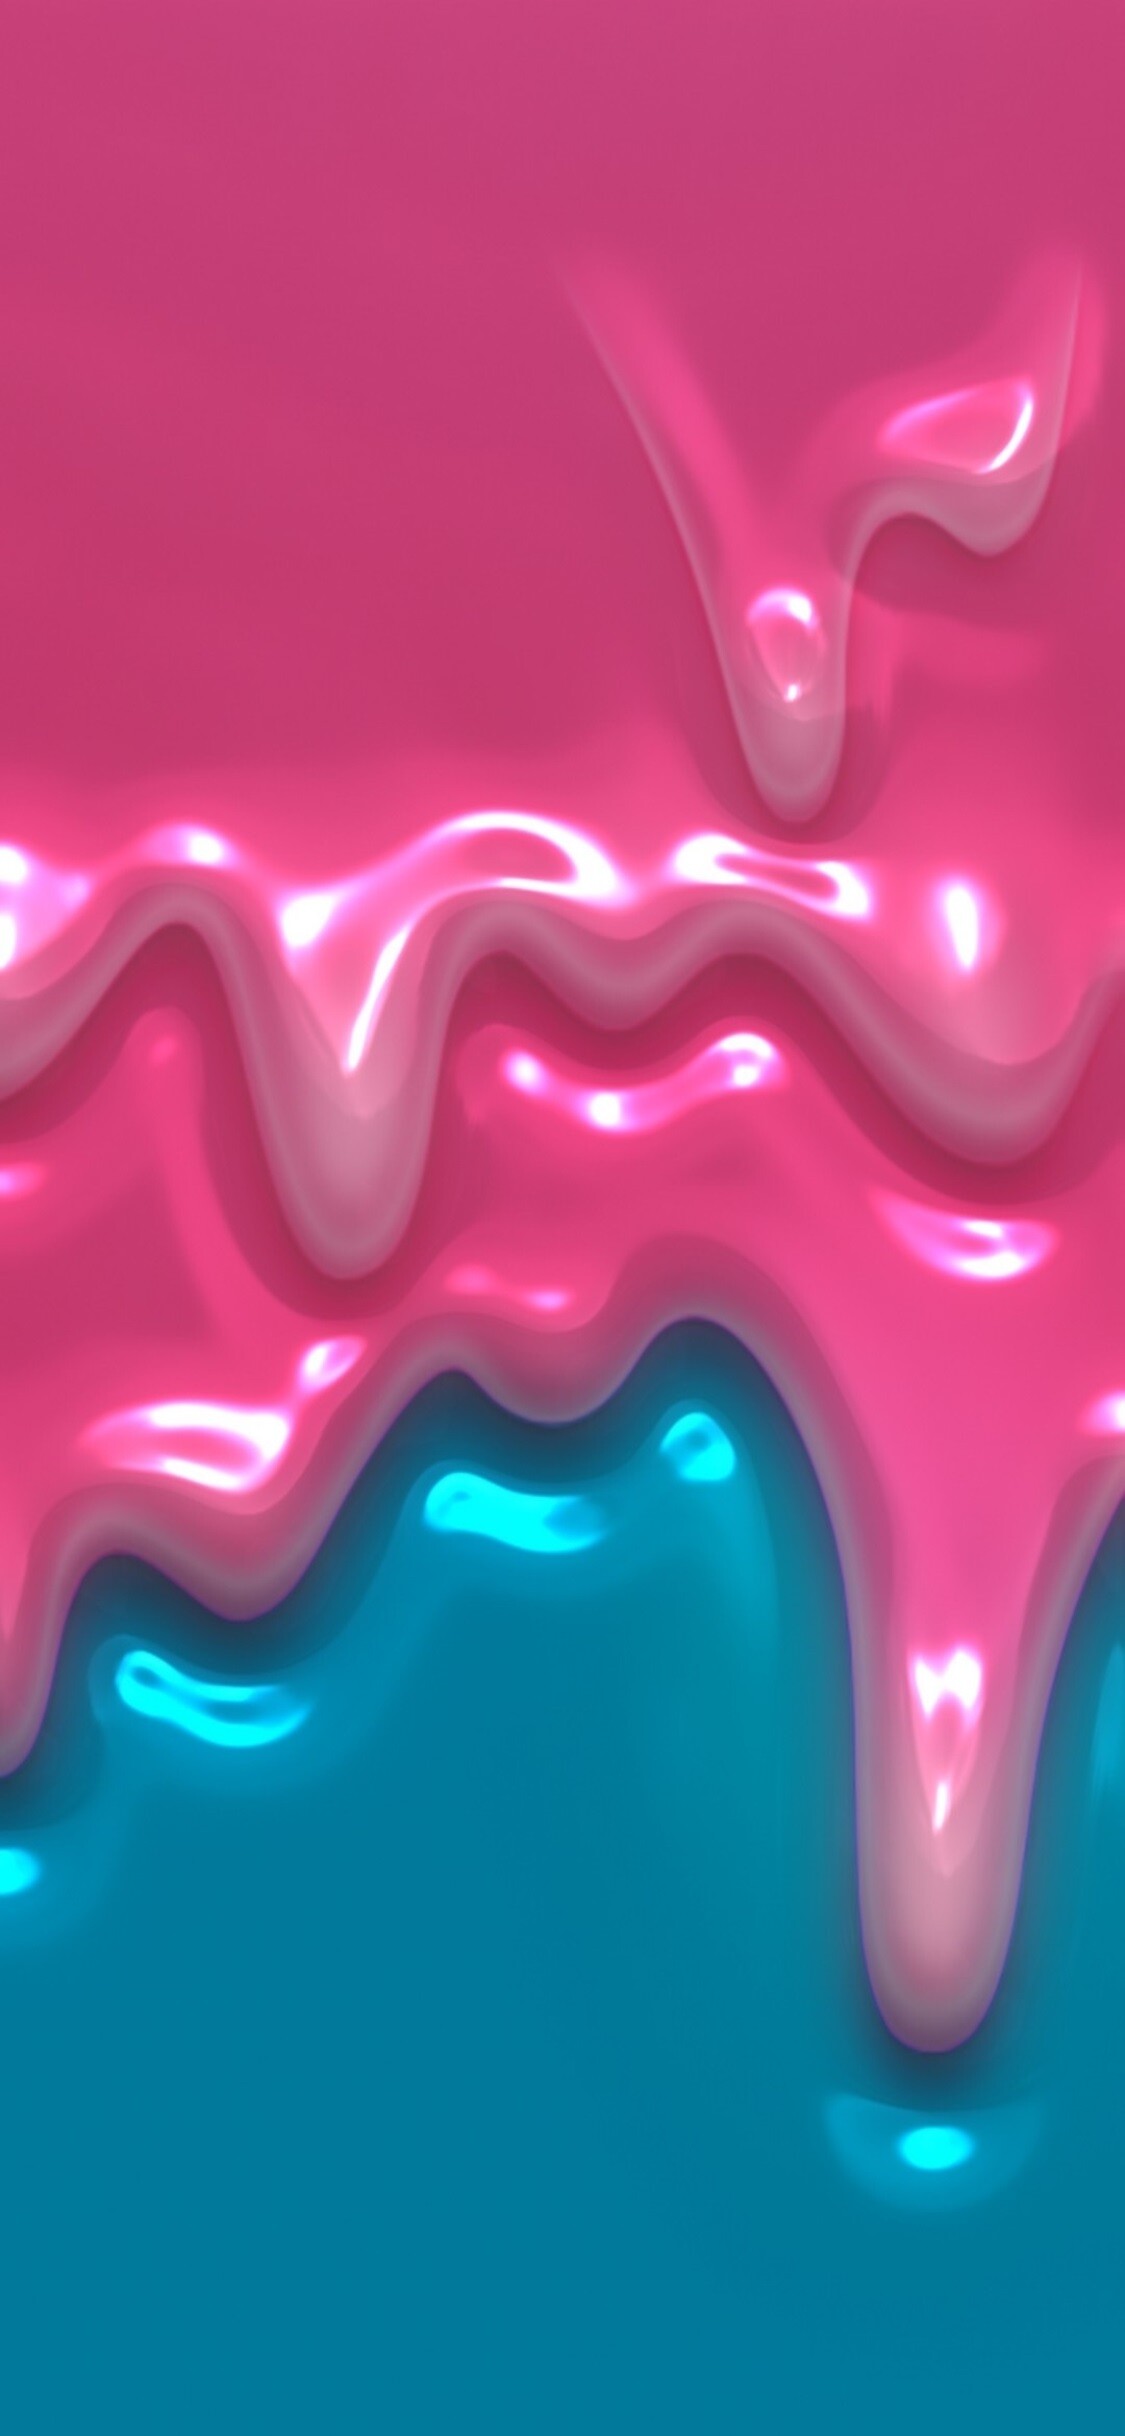 Girly: Bubble gum, Pink and blue plastic substance, Material. 1130x2440 HD Wallpaper.